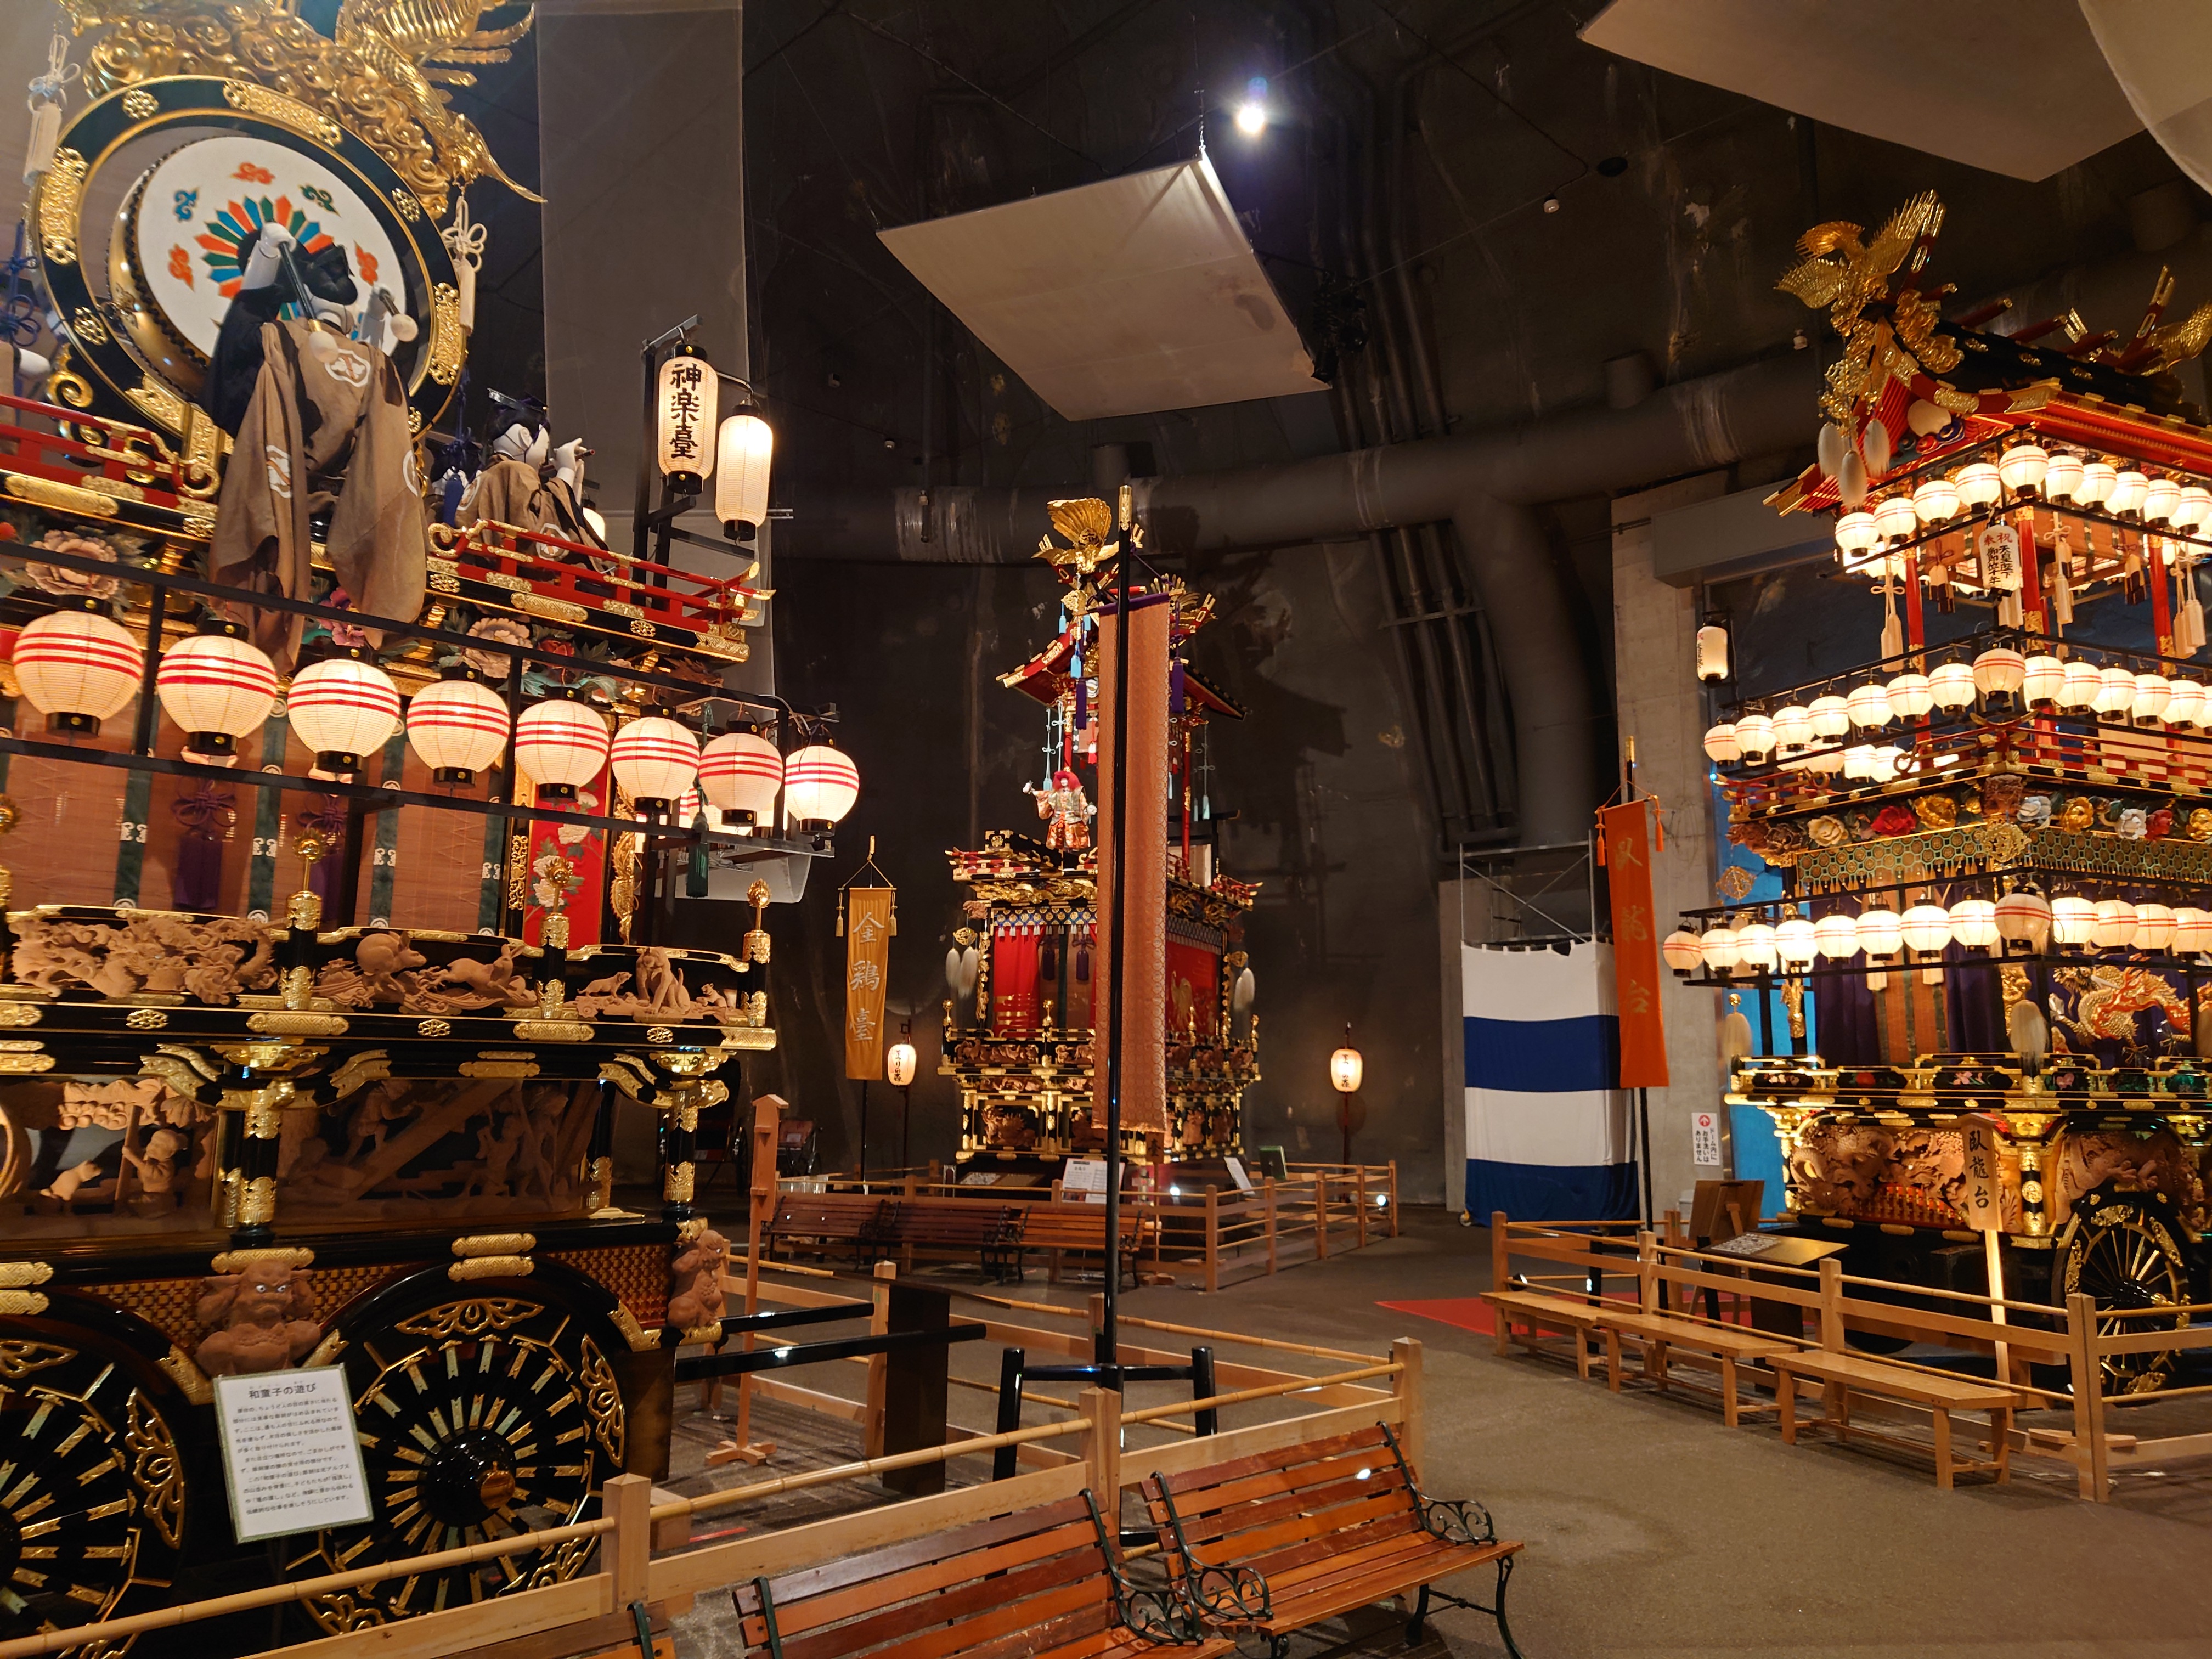 Hida Takayama Matsuri no Mori Museum or Insect Collection of the World E-Ticket (50–100 JPY off Standard Price for Onsite Purchase)